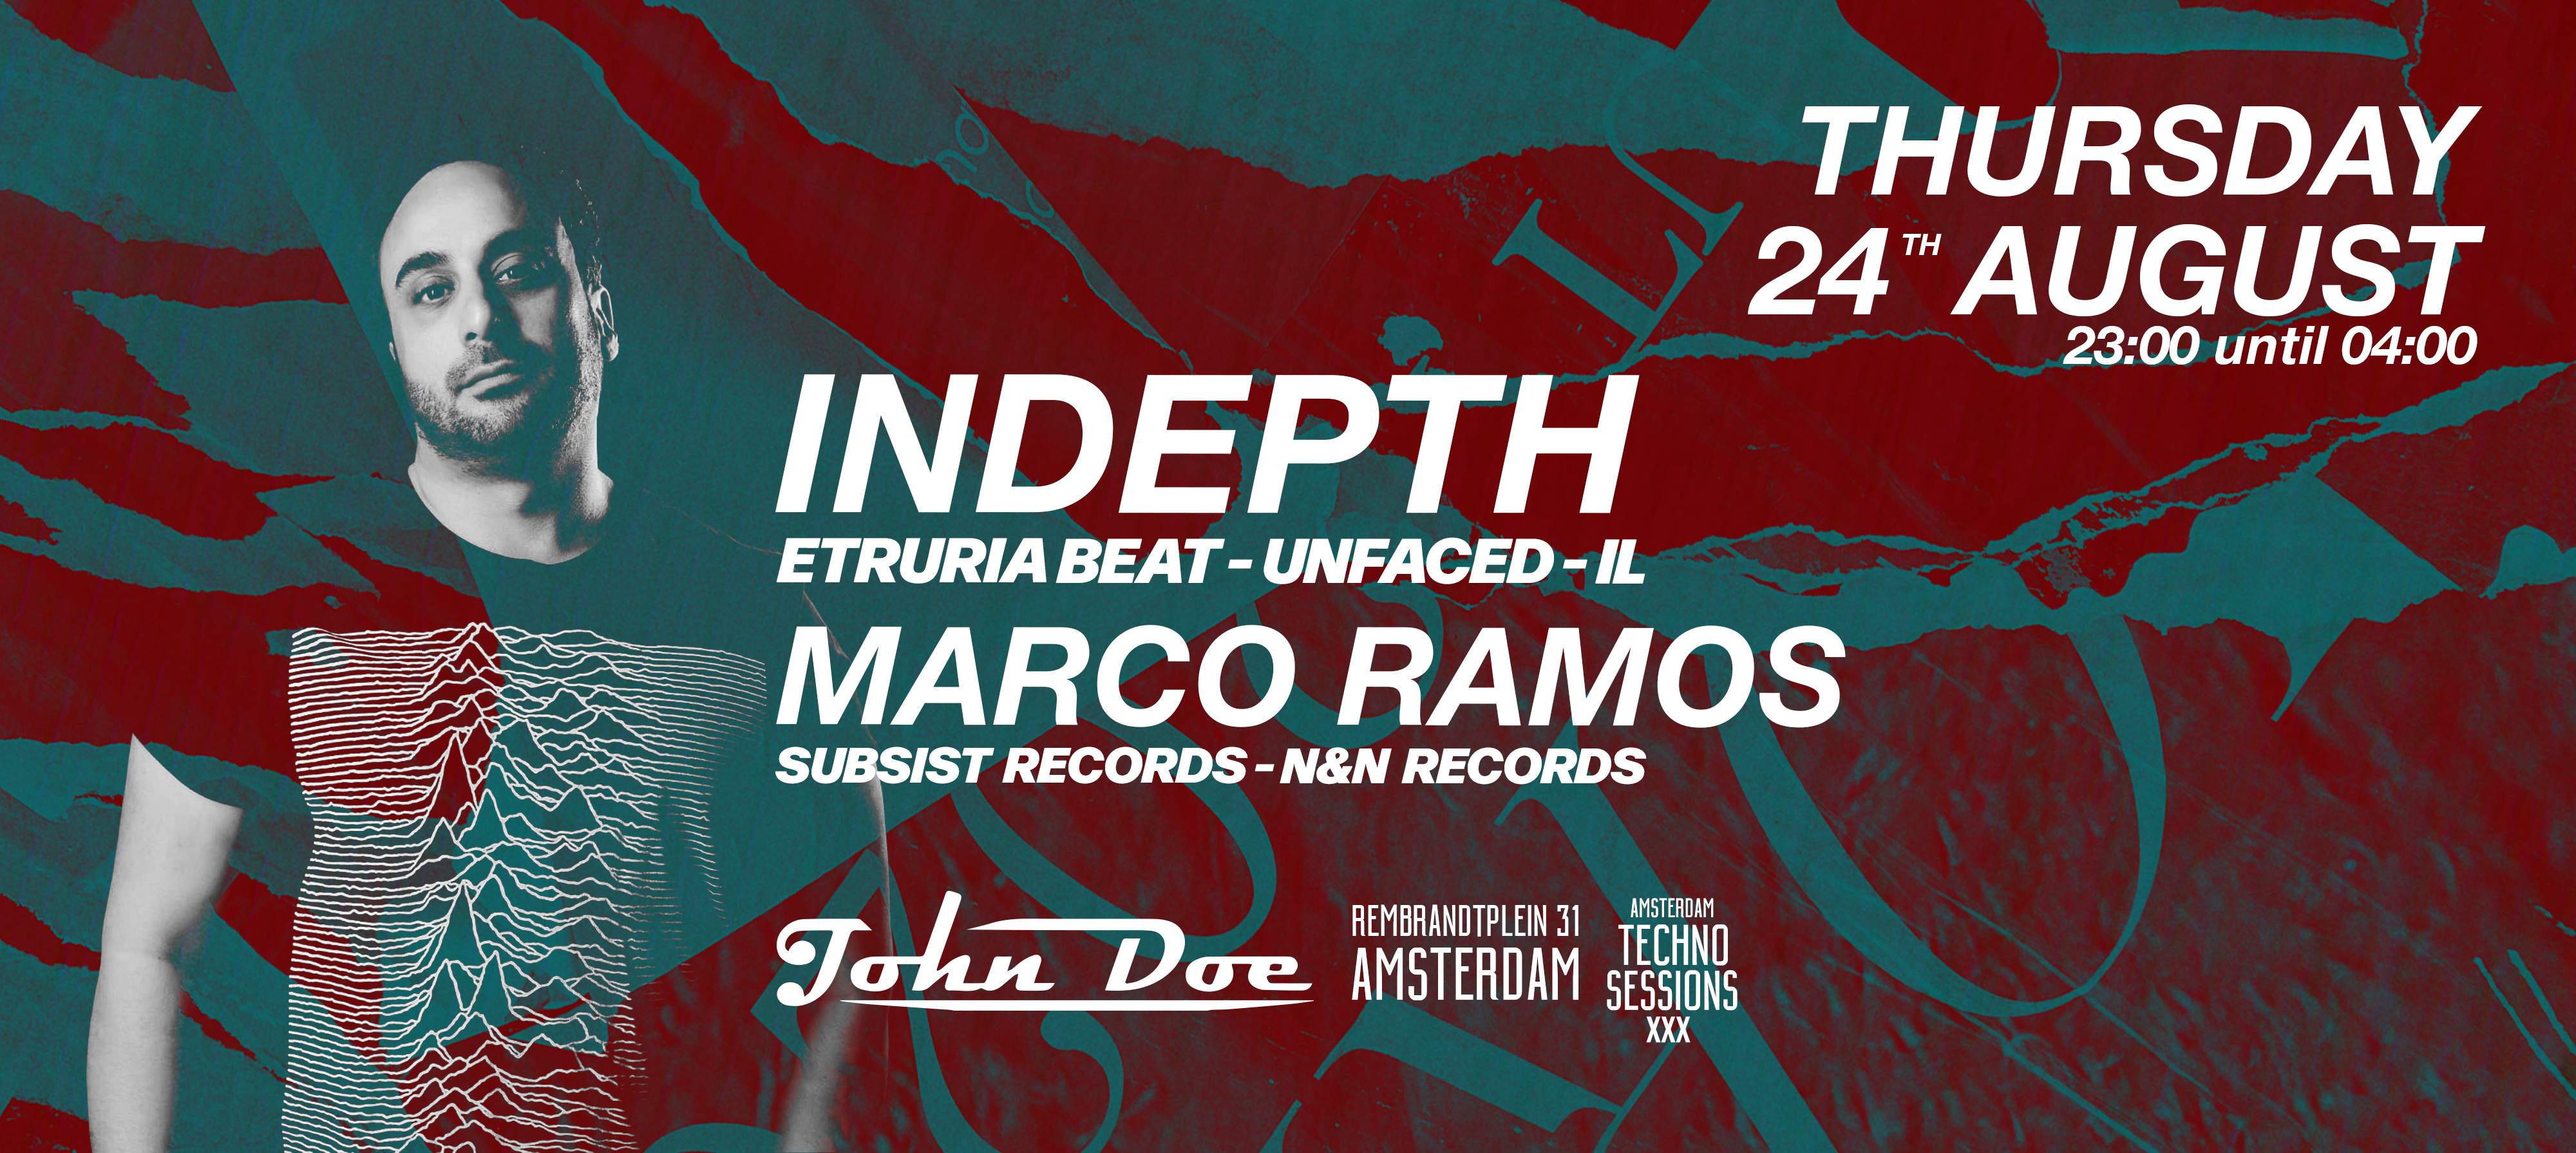 Amsterdam Techno Sessions with Indepth (Etruria Beat - UNFACED) IL - フライヤー表